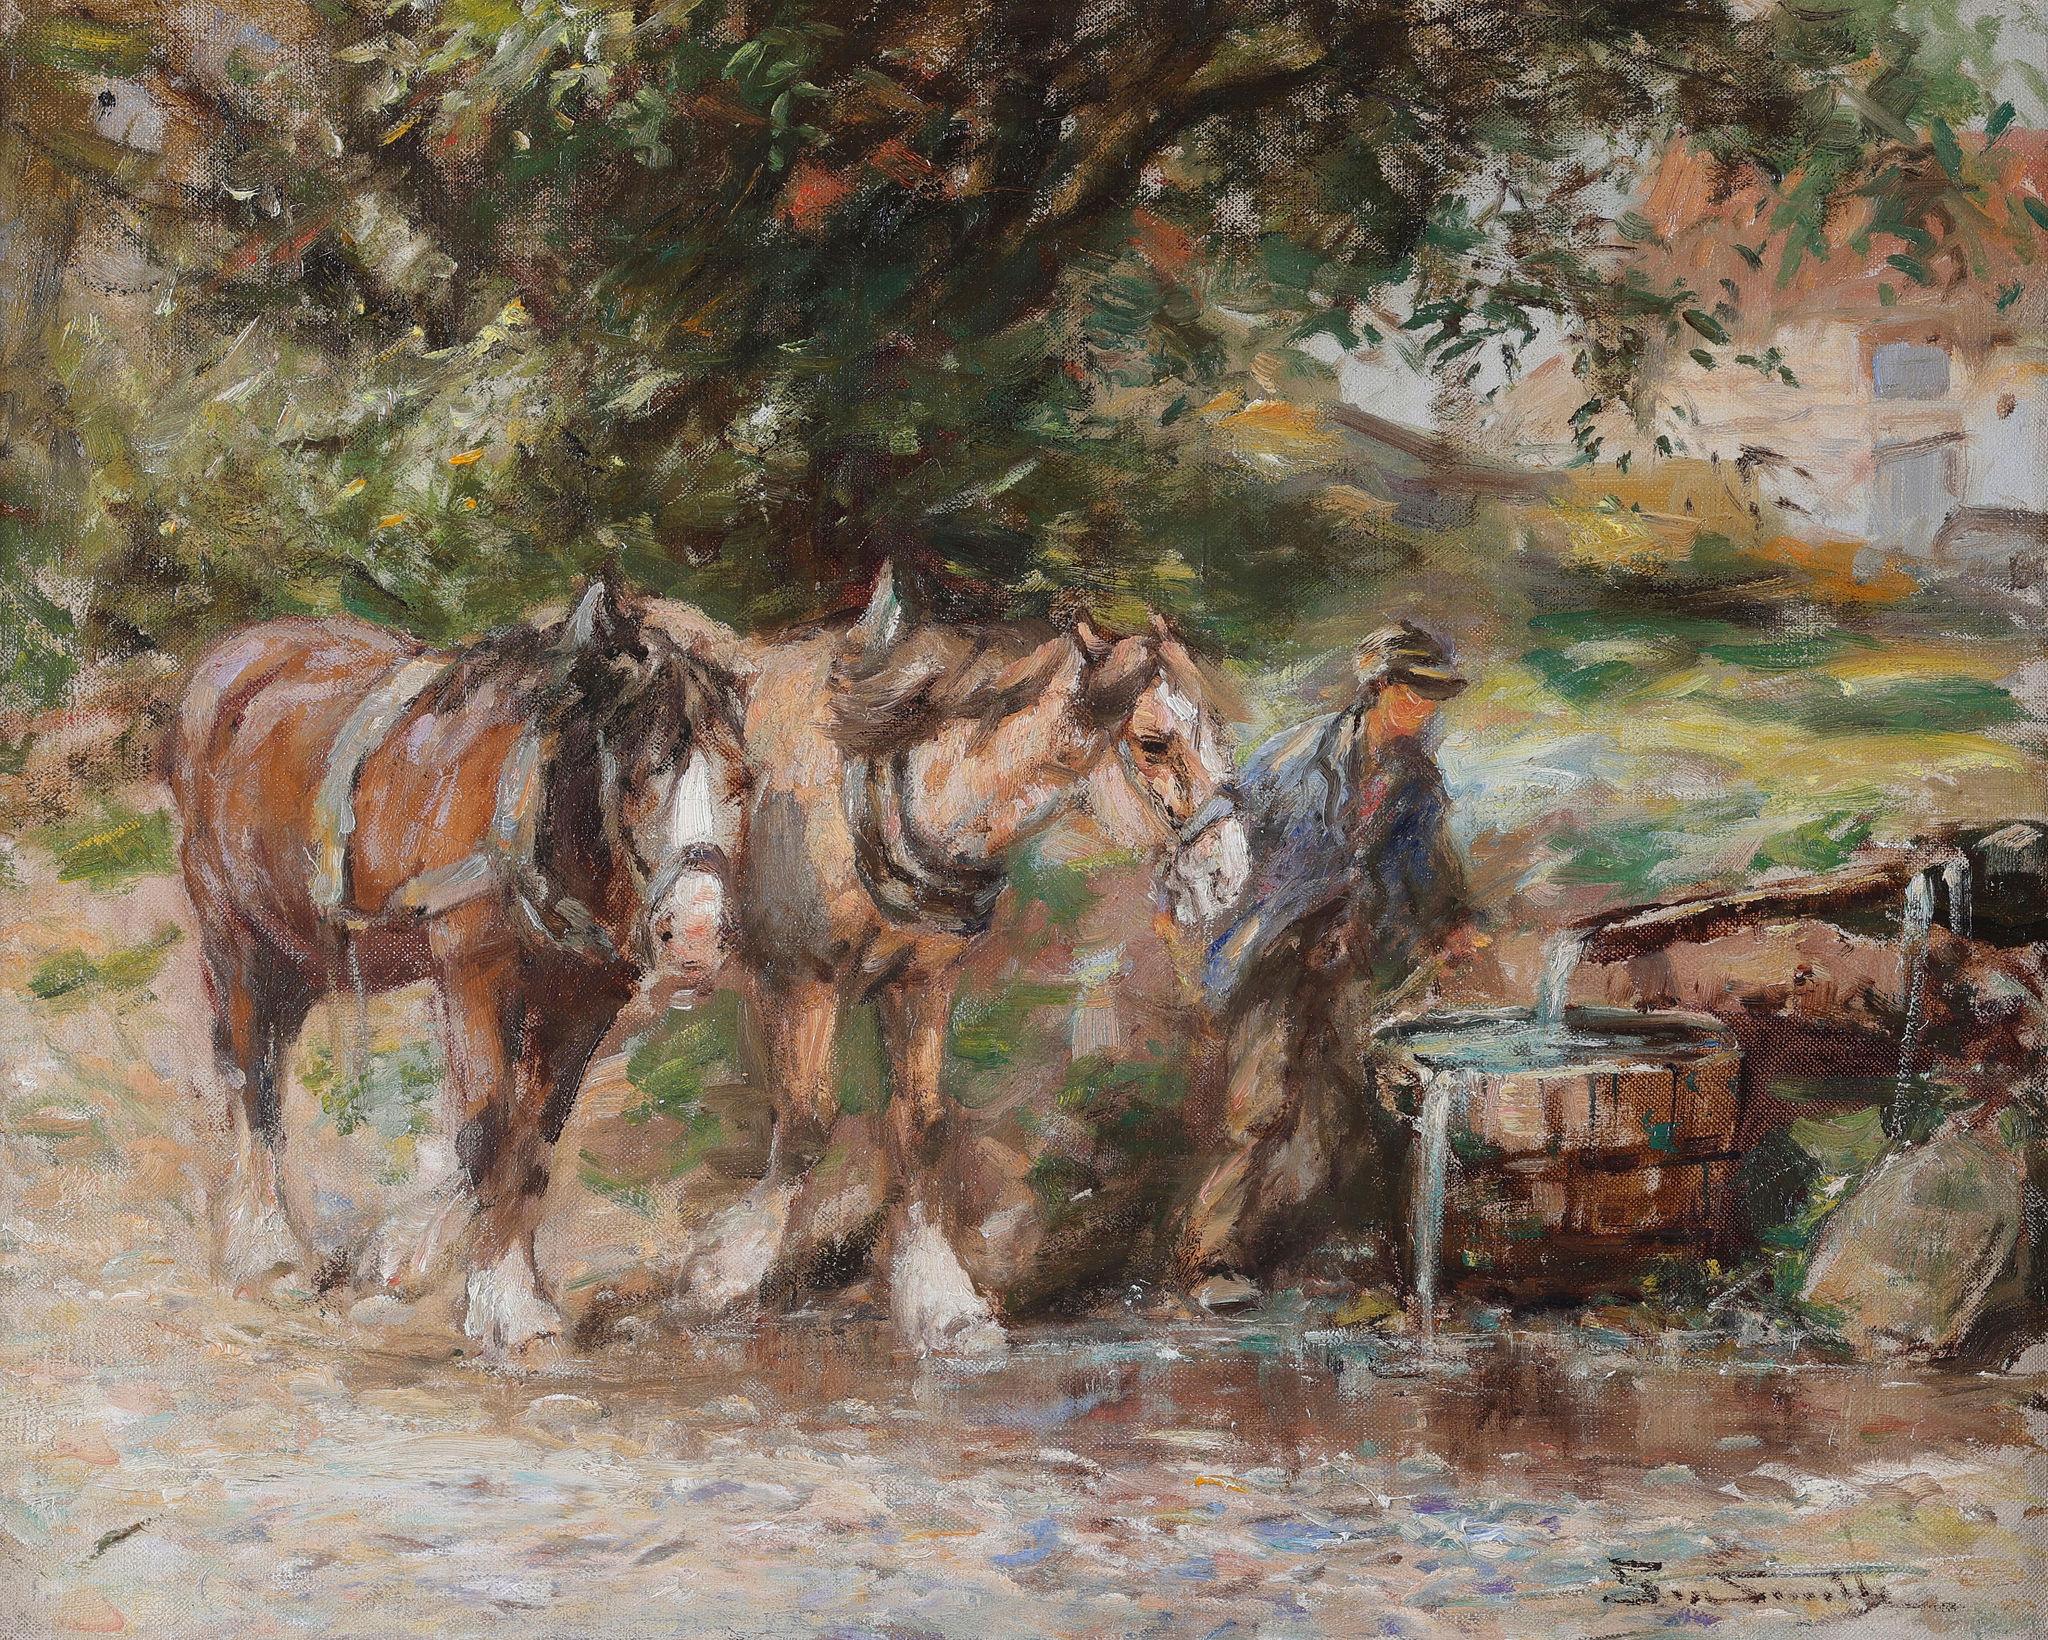 Watering Horses - Painting by George Smith